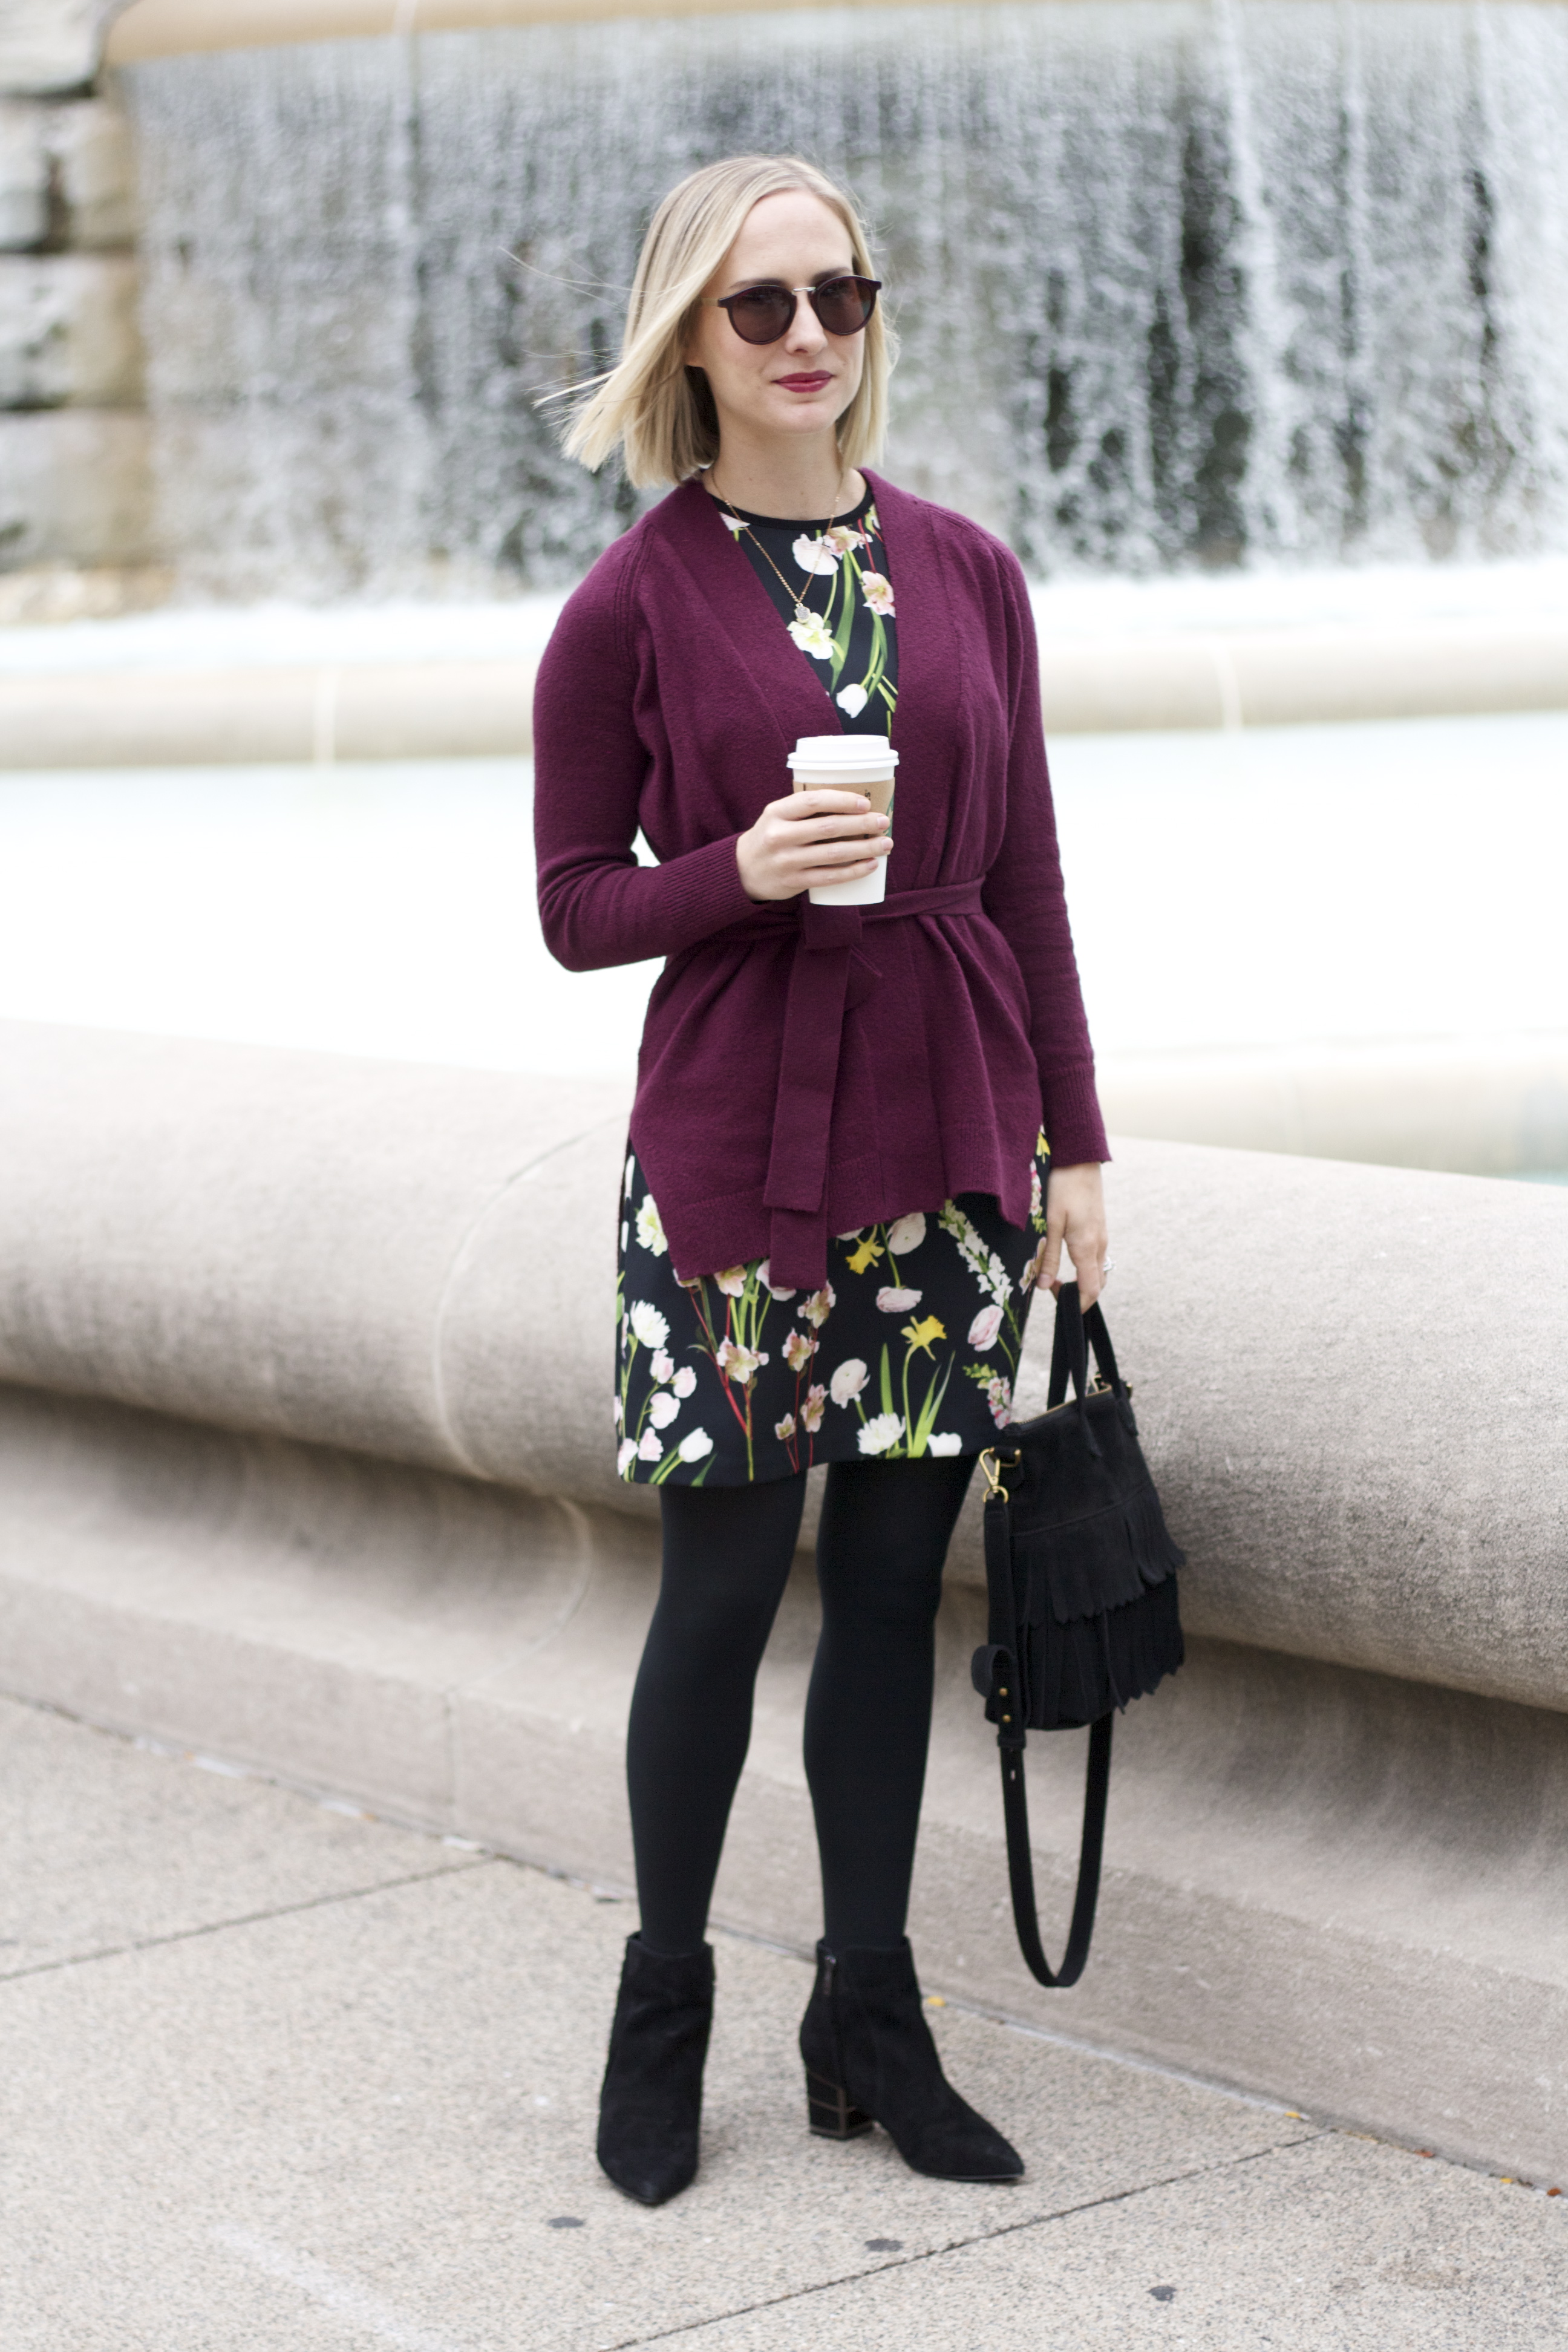 bugundy wrap sweater, floral dress with tights and ankle boots